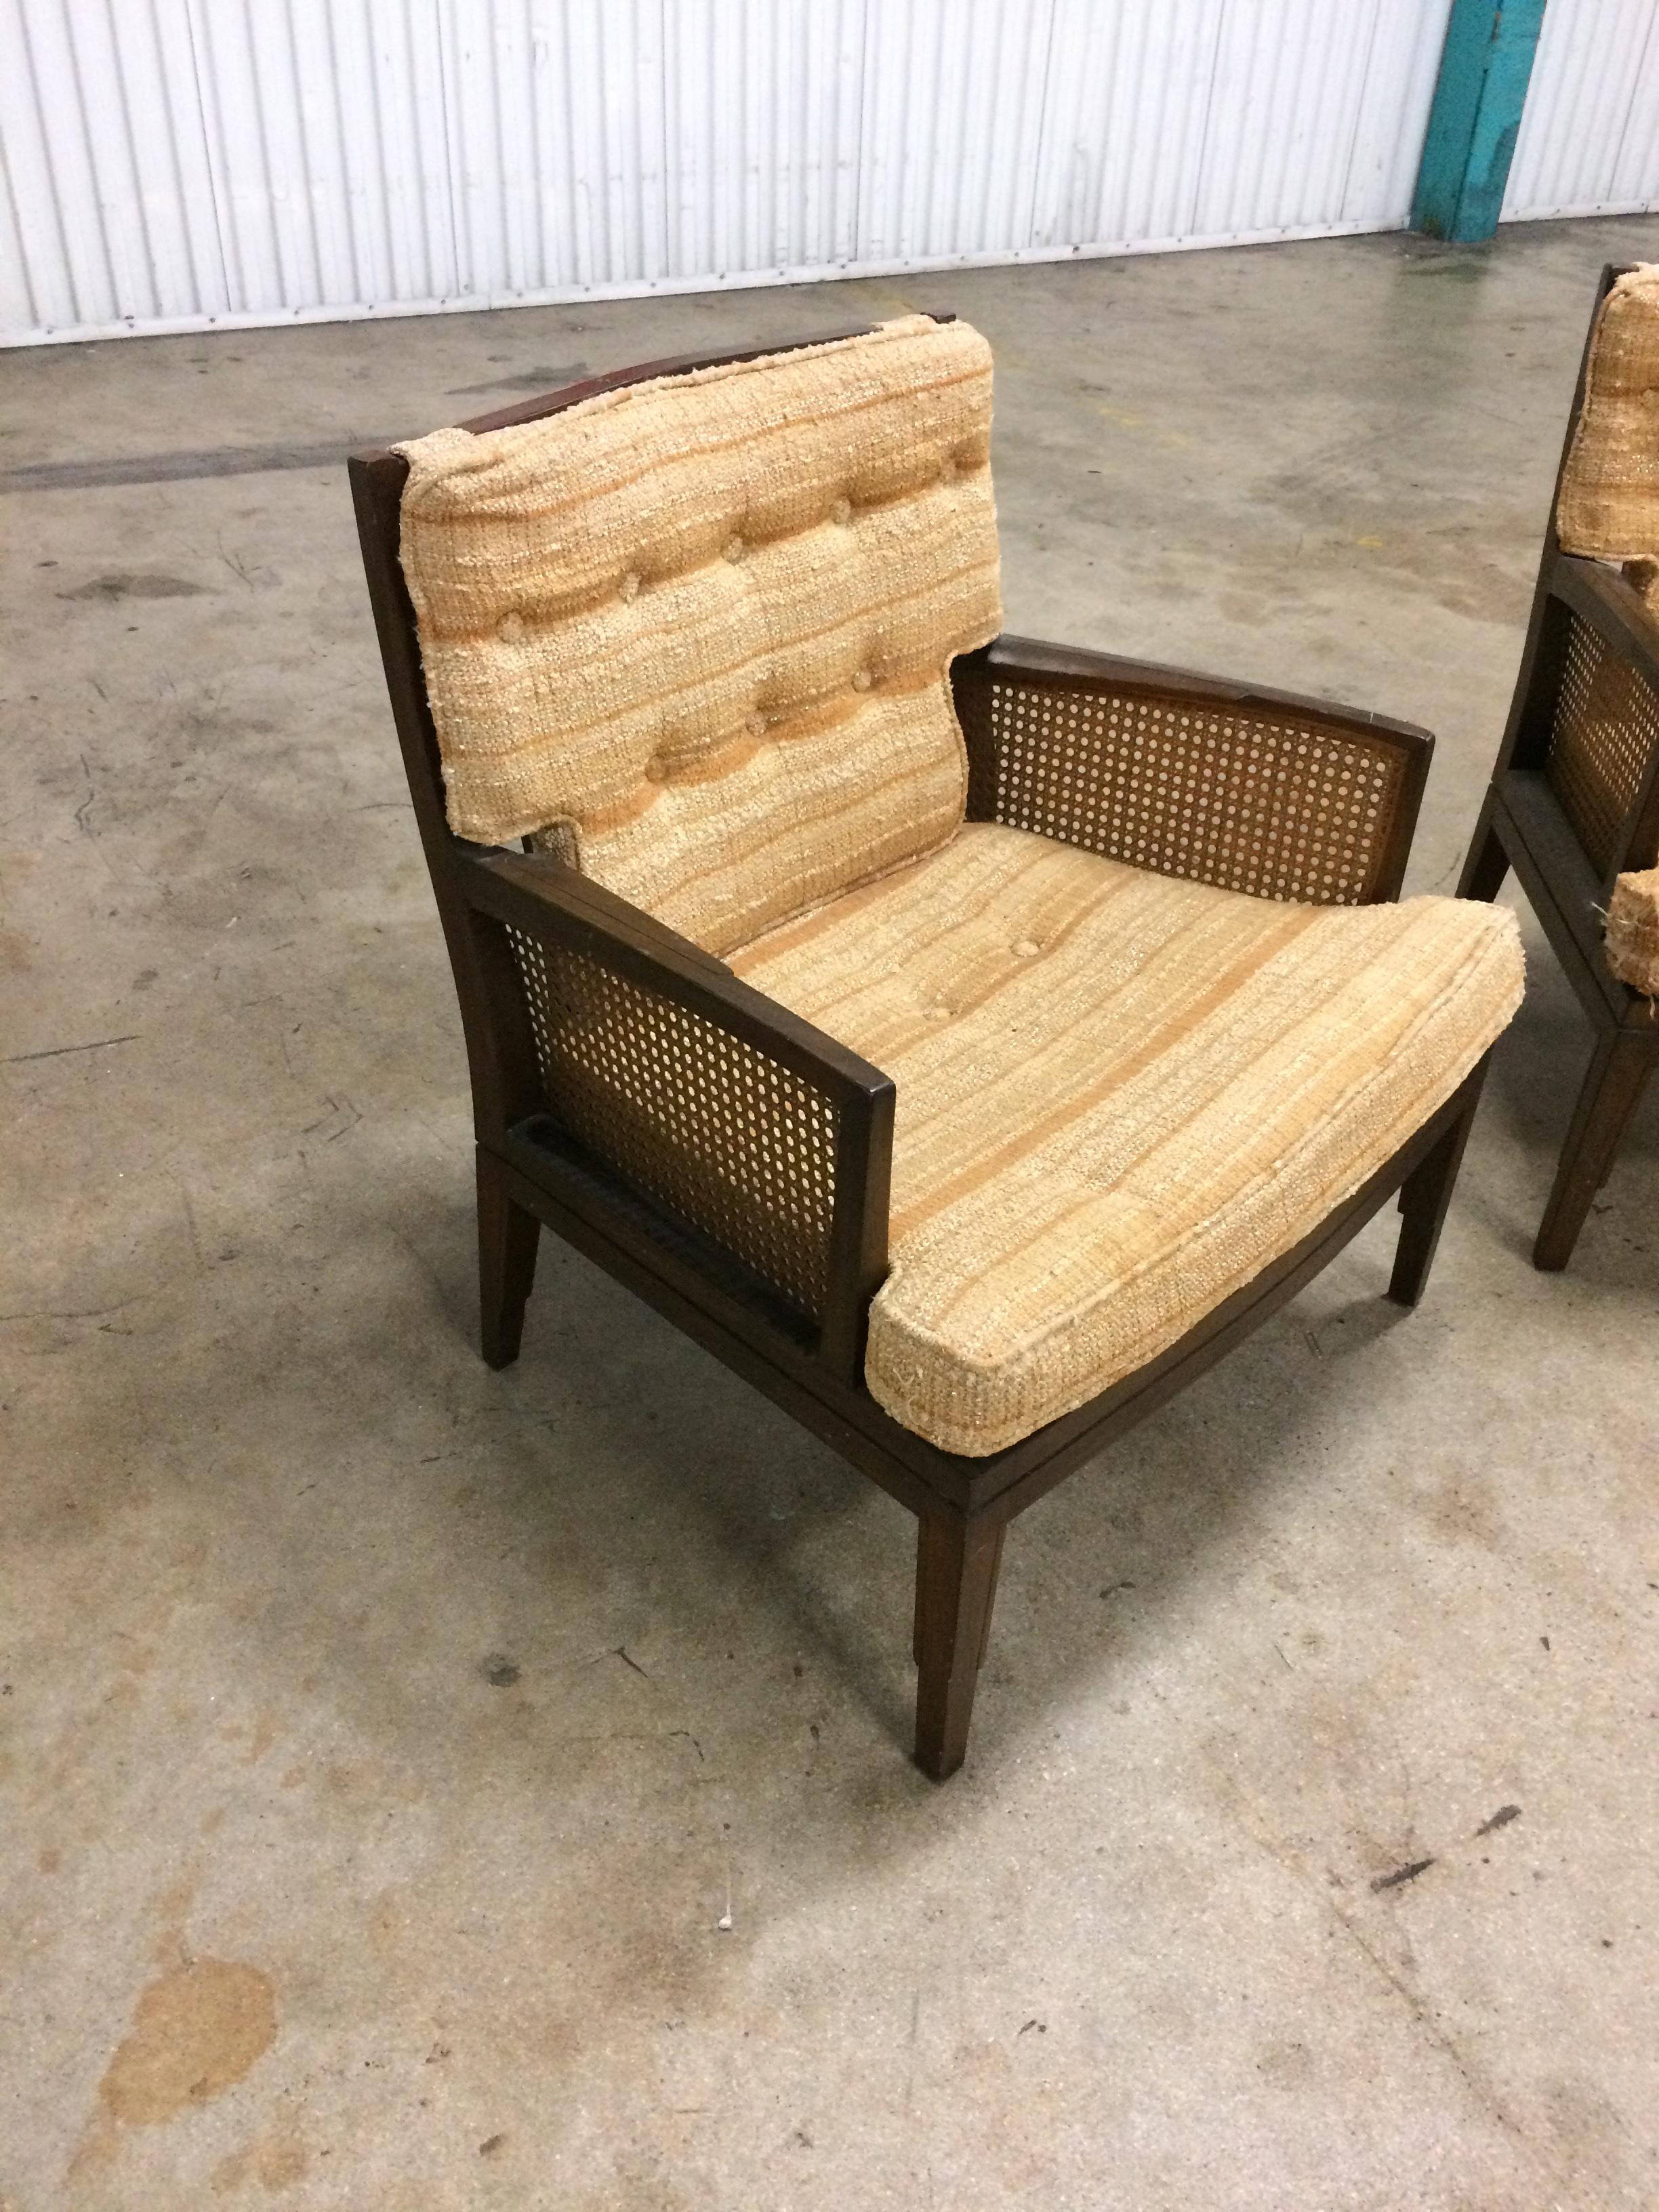 Great pair of number 6603 Baker furniture club of lounge chairs. Caning and wood are both in very good condition. Cushions need to be completely redone. From the 1960s well made and structurally sound chairs.